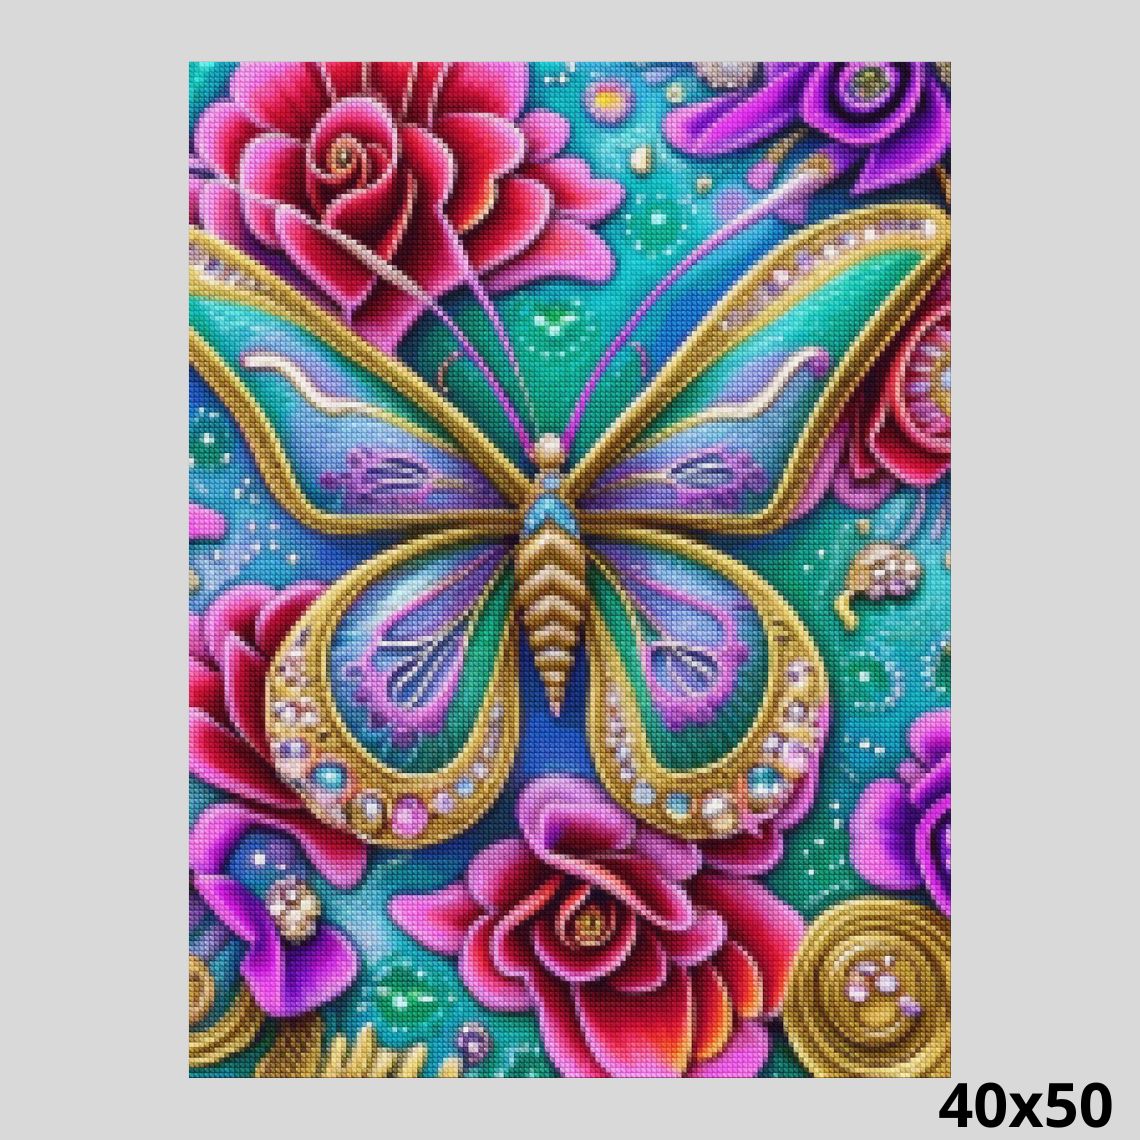 Butterfly Adorned with Gems 40x50 Diamond Painting